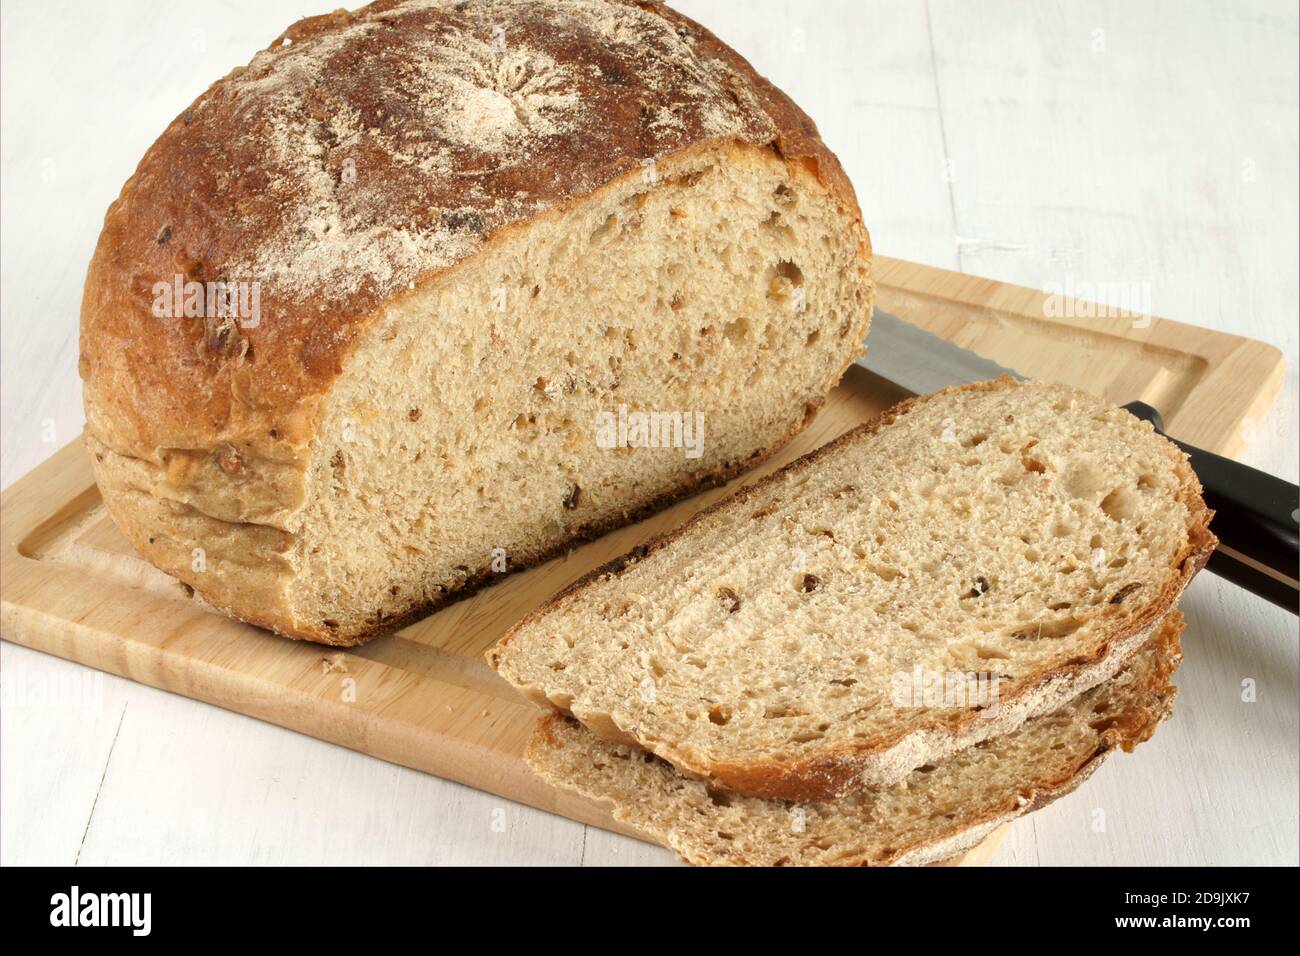 Fresh baked rustic malted wholemeal loaf Stock Photo